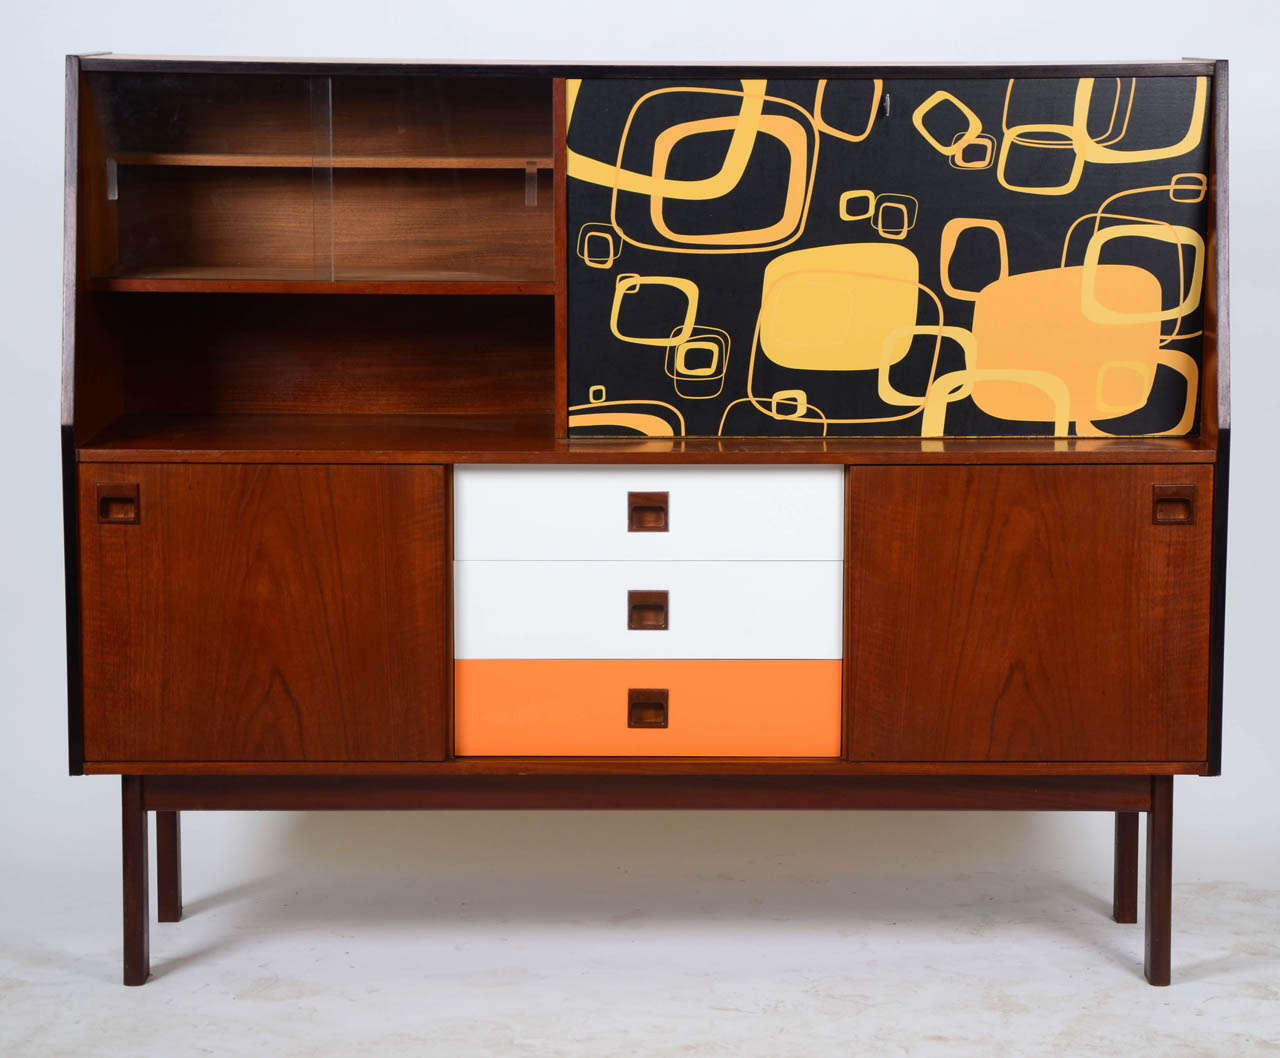 Portwood Furniture 1970's teak sideboard featuring unique graphics and color laminate drawer facings. Glass and timber sliding doors.